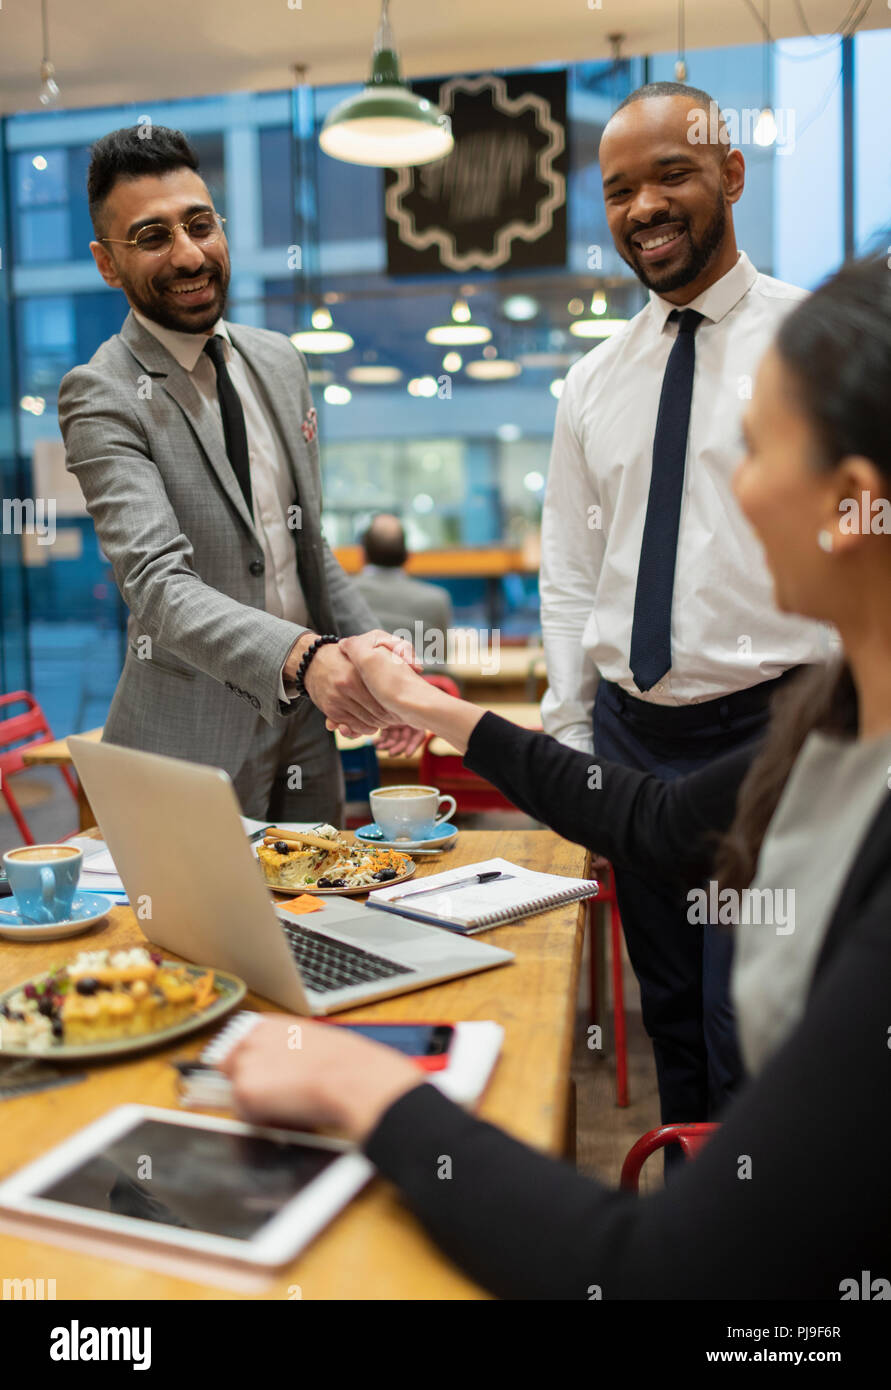 Business people handshaking, working in cafe Stock Photo